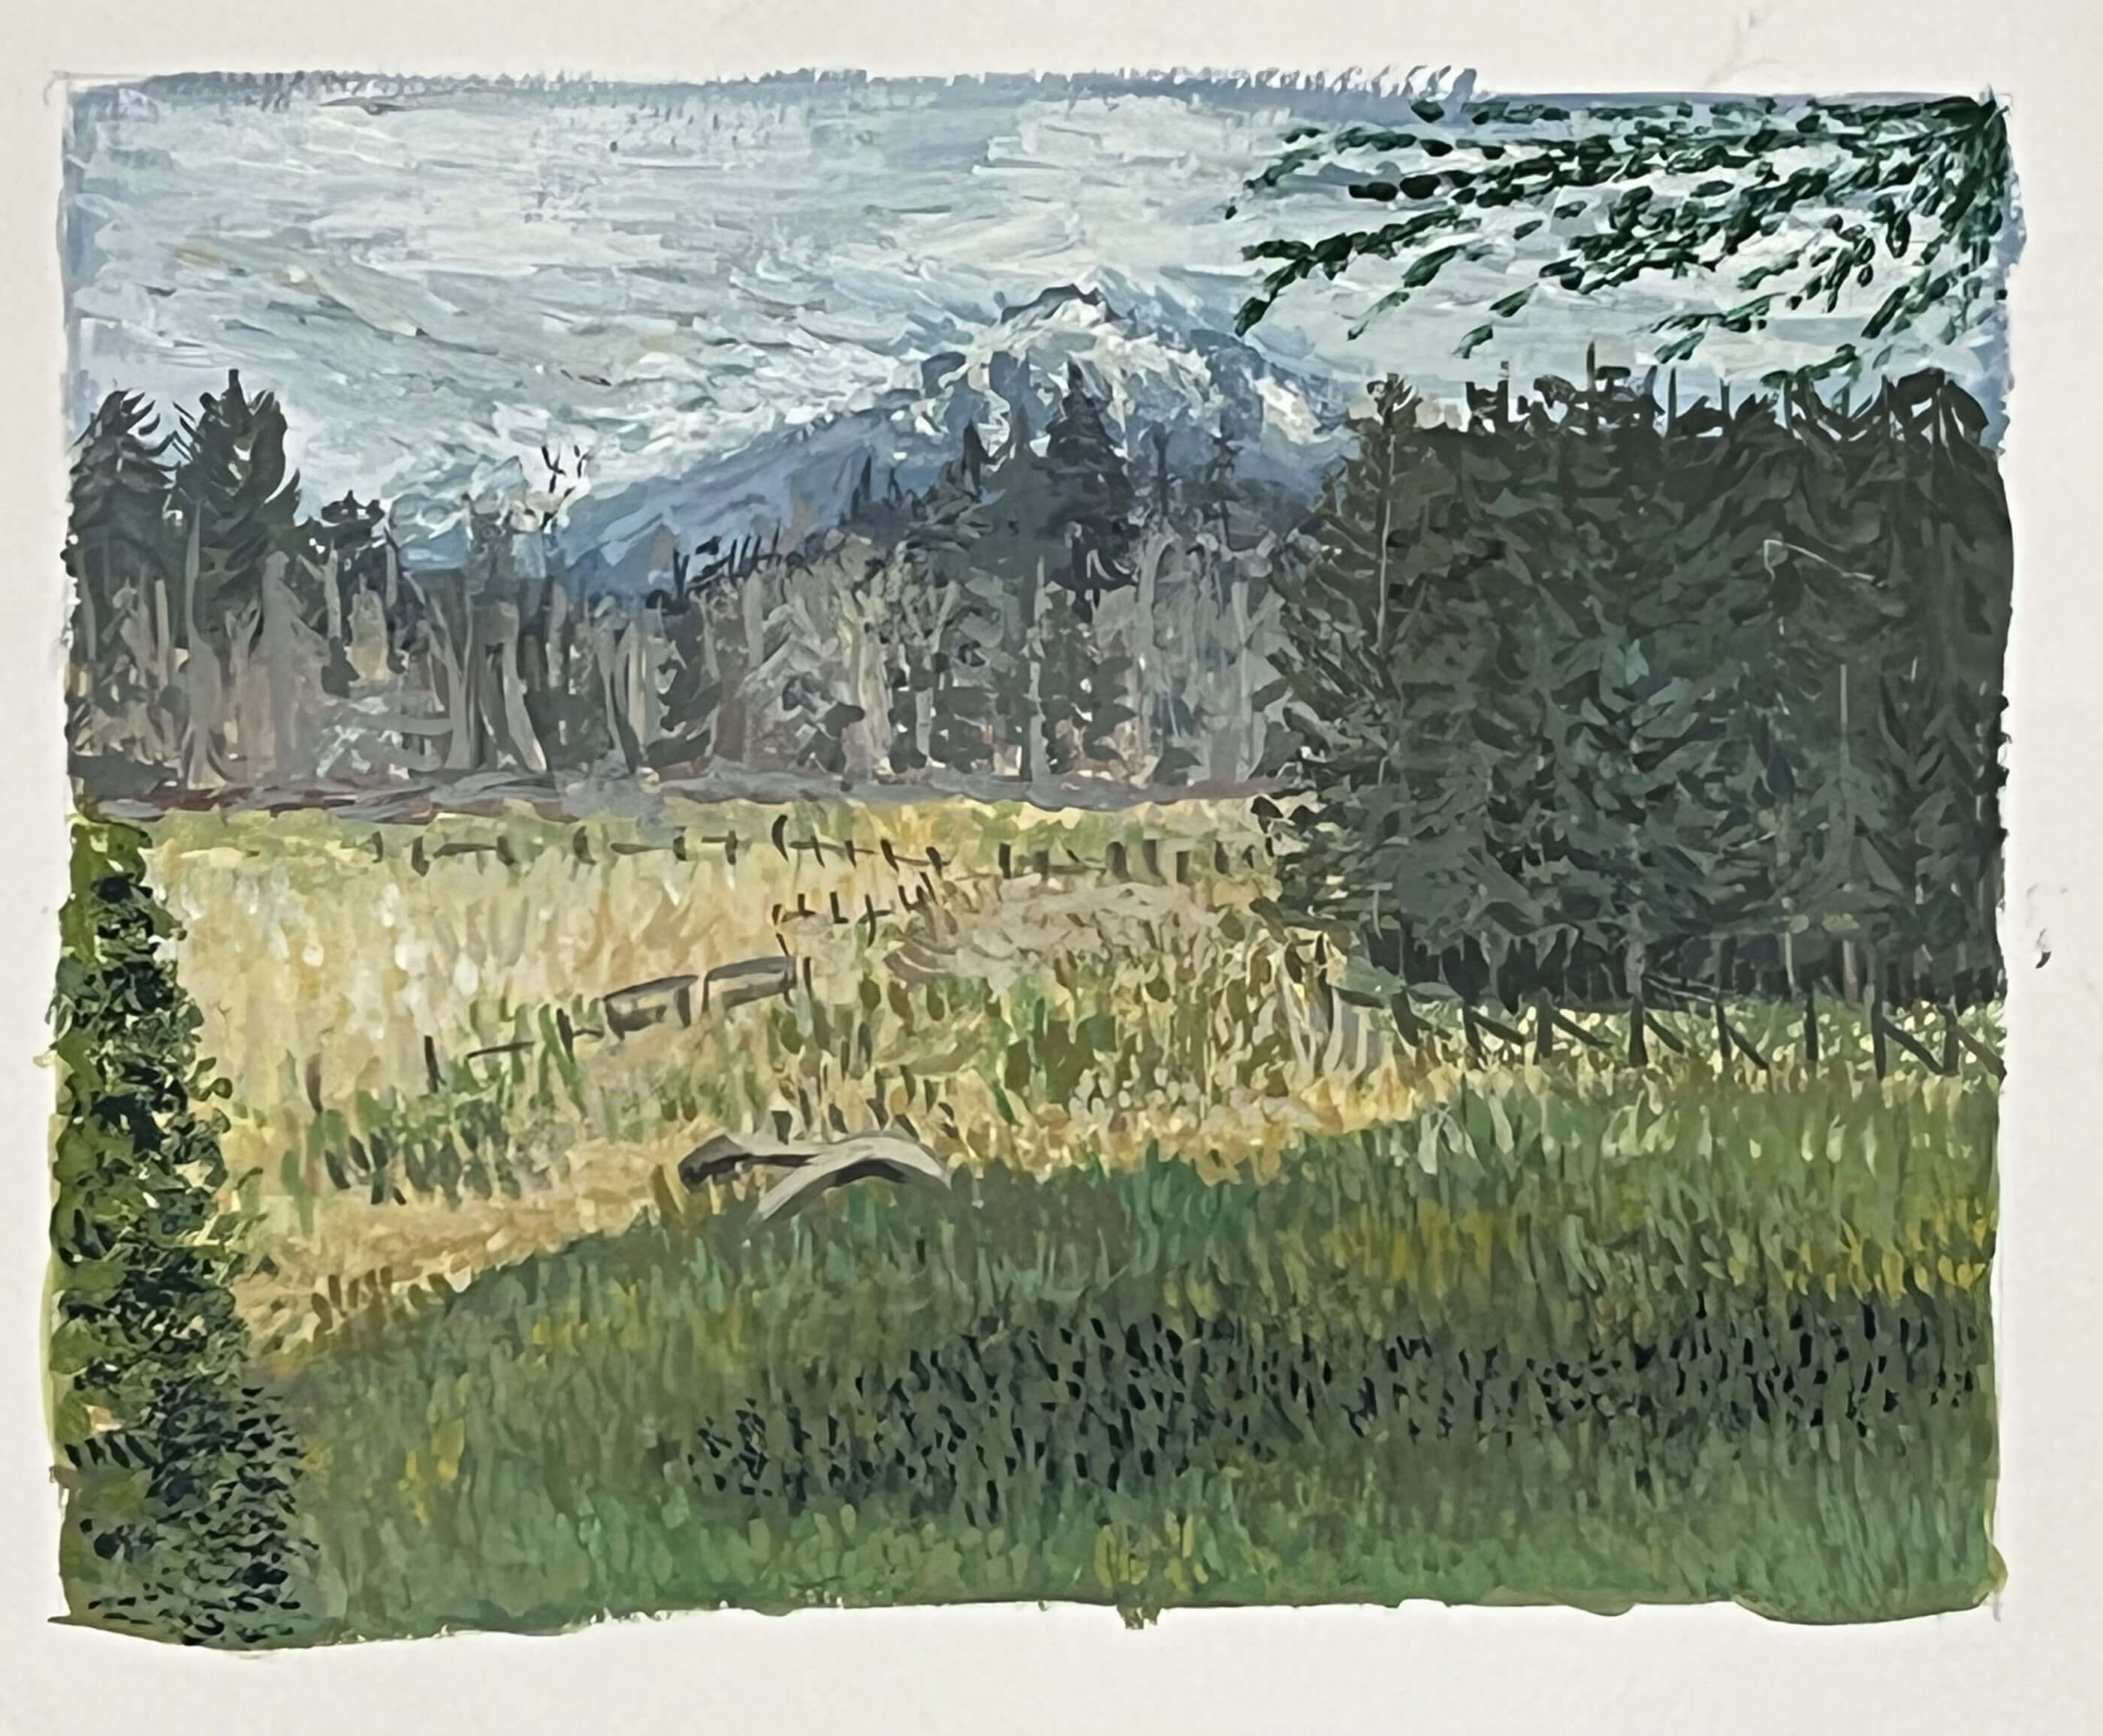 Painting of a meadow with a mountain in the background.